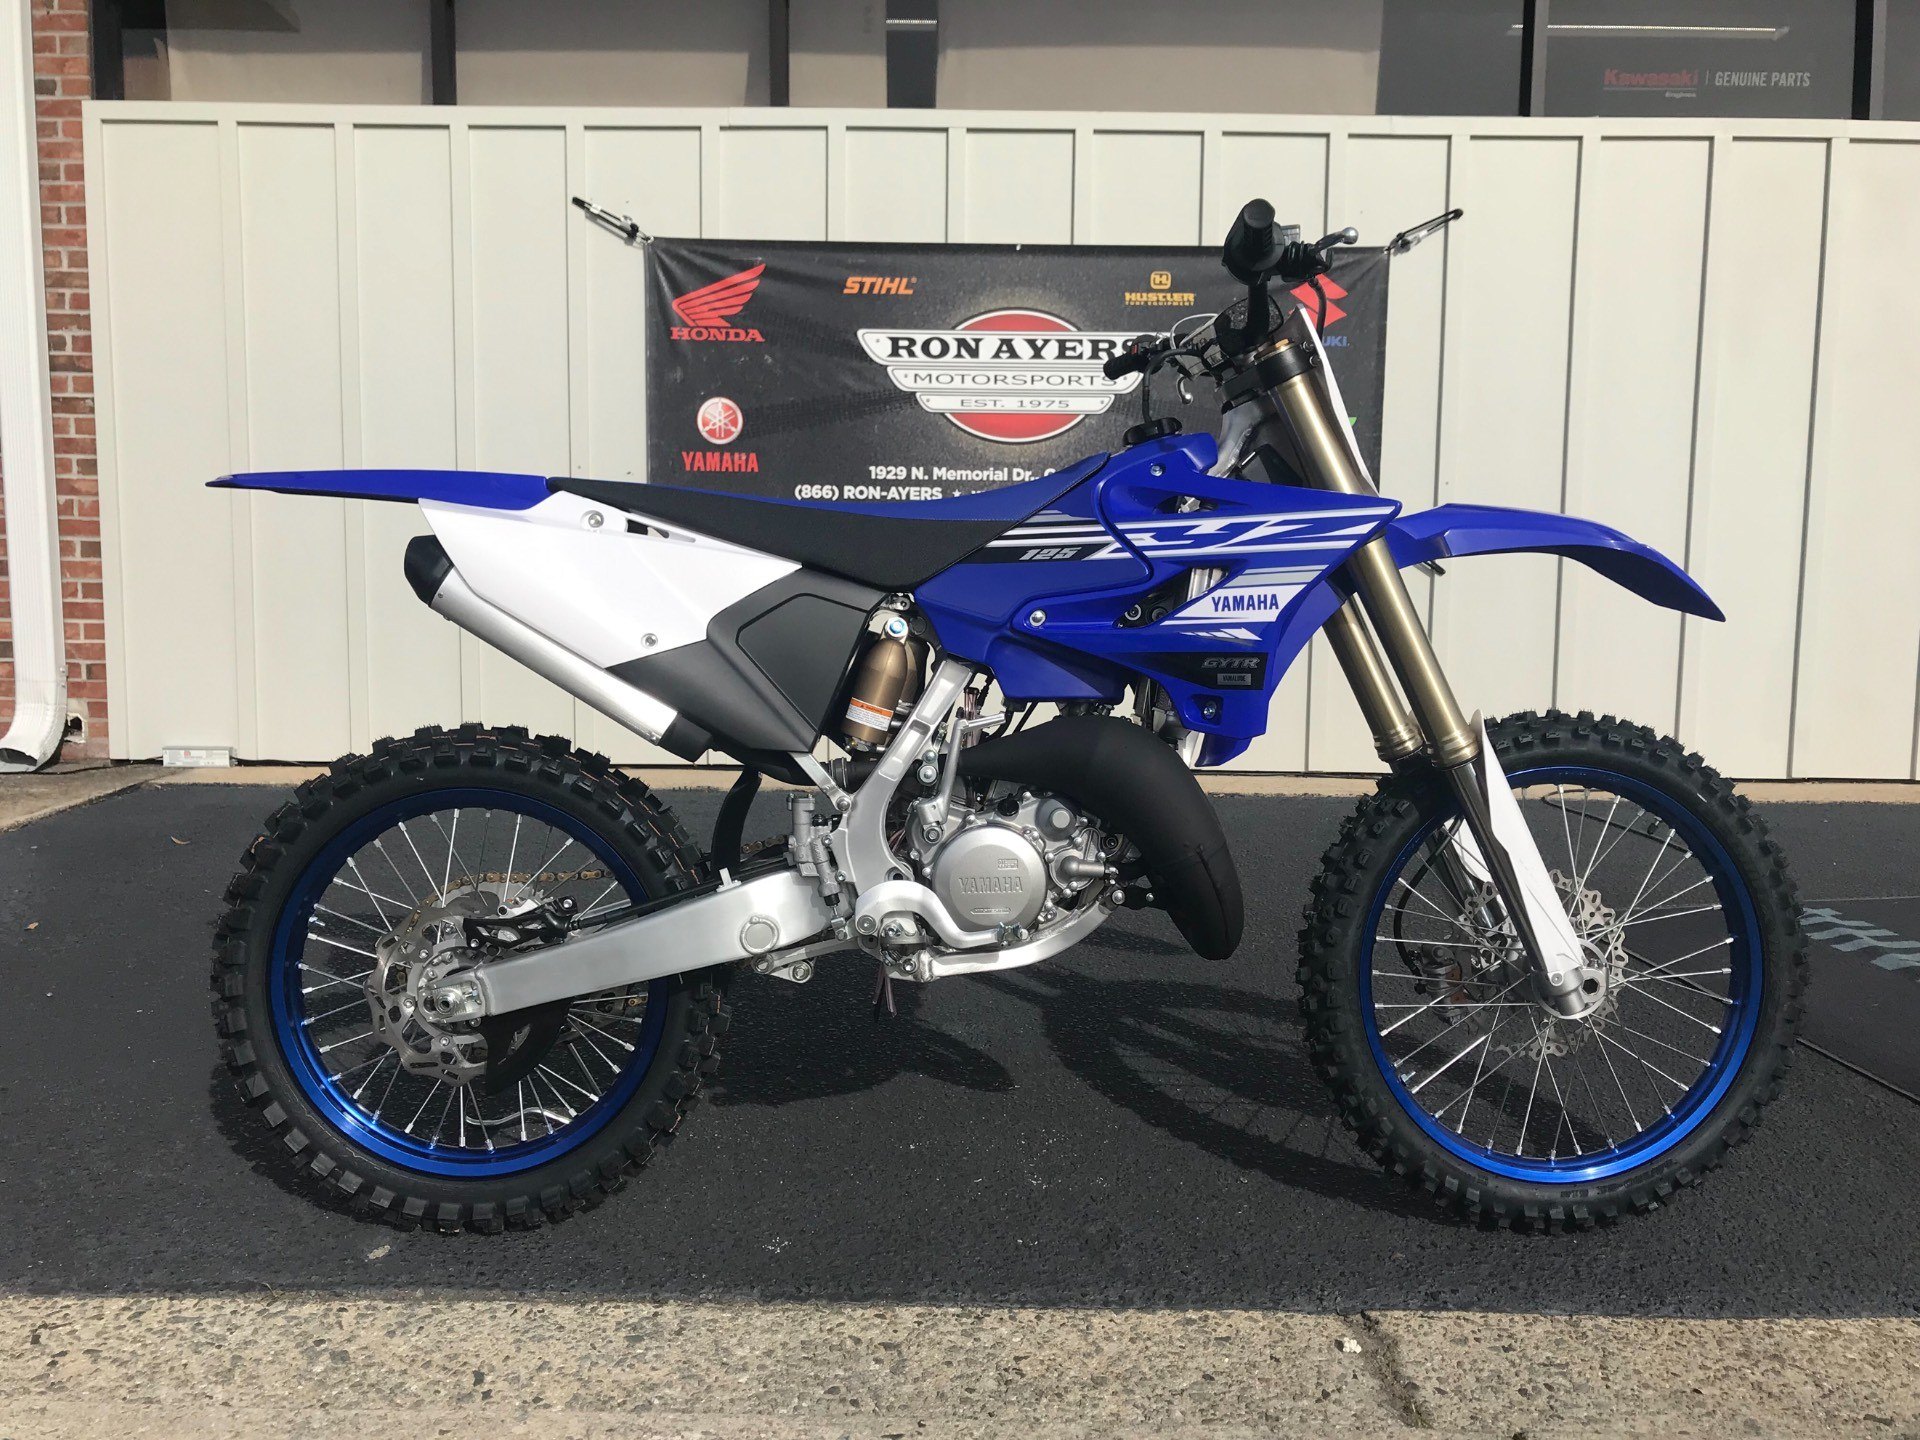 New 2019 Yamaha Yz125 Motorcycles In Greenville Nc Stock Number N A.